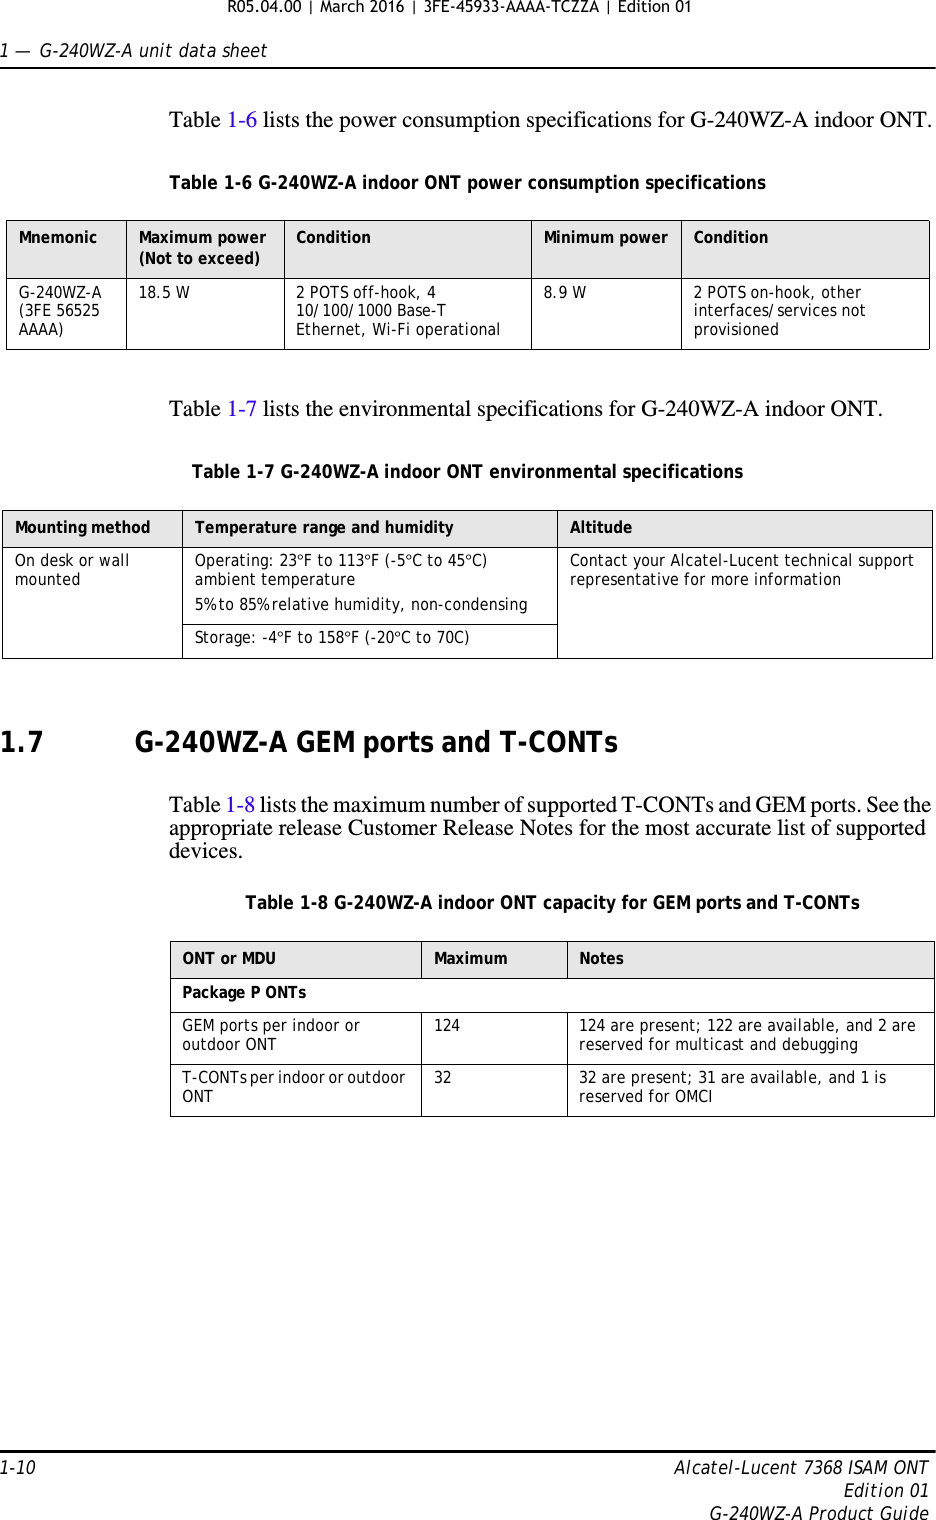 1 —  G-240WZ-A unit data sheet1-10 Alcatel-Lucent 7368 ISAM ONTEdition 01G-240WZ-A Product GuideTable 1-6 lists the power consumption specifications for G-240WZ-A indoor ONT.Table 1-6 G-240WZ-A indoor ONT power consumption specificationsTable 1-7 lists the environmental specifications for G-240WZ-A indoor ONT.Table 1-7 G-240WZ-A indoor ONT environmental specifications1.7 G-240WZ-A GEM ports and T-CONTsTable 1-8 lists the maximum number of supported T-CONTs and GEM ports. See the appropriate release Customer Release Notes for the most accurate list of supported devices.Table 1-8 G-240WZ-A indoor ONT capacity for GEM ports and T-CONTsMnemonic Maximum power (Not to exceed) Condition Minimum power ConditionG-240WZ-A (3FE 56525 AAAA)18.5 W 2 POTS off-hook, 4 10/100/1000 Base-T Ethernet, Wi-Fi operational8.9 W 2 POTS on-hook, other interfaces/services not provisionedMounting method Temperature range and humidity AltitudeOn desk or wall mounted Operating: 23°F to 113°F (-5°C to 45°C) ambient temperature5% to 85% relative humidity, non-condensingContact your Alcatel-Lucent technical support representative for more informationStorage: -4°F to 158°F (-20°C to 70C)ONT or MDU Maximum NotesPackage P ONTsGEM ports per indoor or outdoor ONT 124  124 are present; 122 are available, and 2 are reserved for multicast and debuggingT-CONTs per indoor or outdoor ONT 32 32 are present; 31 are available, and 1 is reserved for OMCIR05.04.00 | March 2016 | 3FE-45933-AAAA-TCZZA | Edition 01 